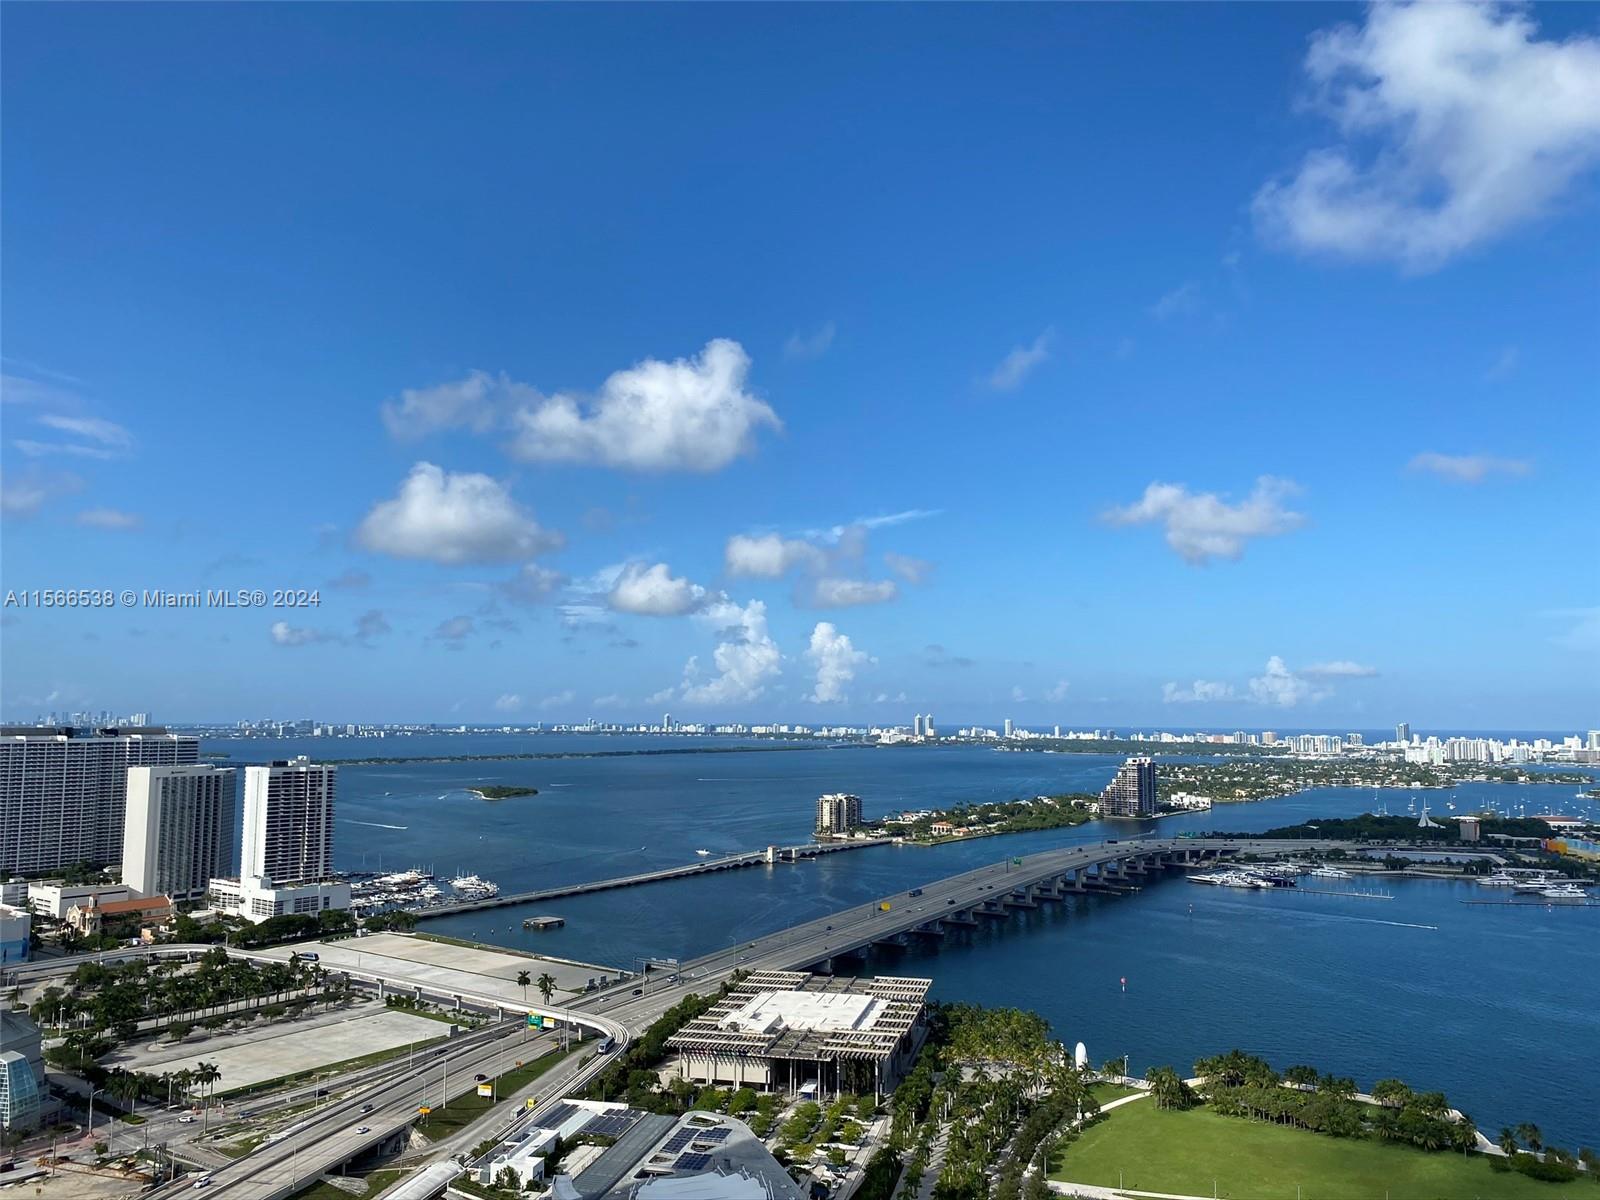 Discover waterfront living in this 1BR/2BA condo with direct bay views from the living area to the master bedroom. Located across from Kaseya Arena and a block from i95, enjoy Downtown Miami's best. The unit features tile floors, floor-to-ceiling sliding impact glass doors, and an expansive 192sf balcony. With two full bathrooms and ready to move in, this home offers convenience and style in a prime location.